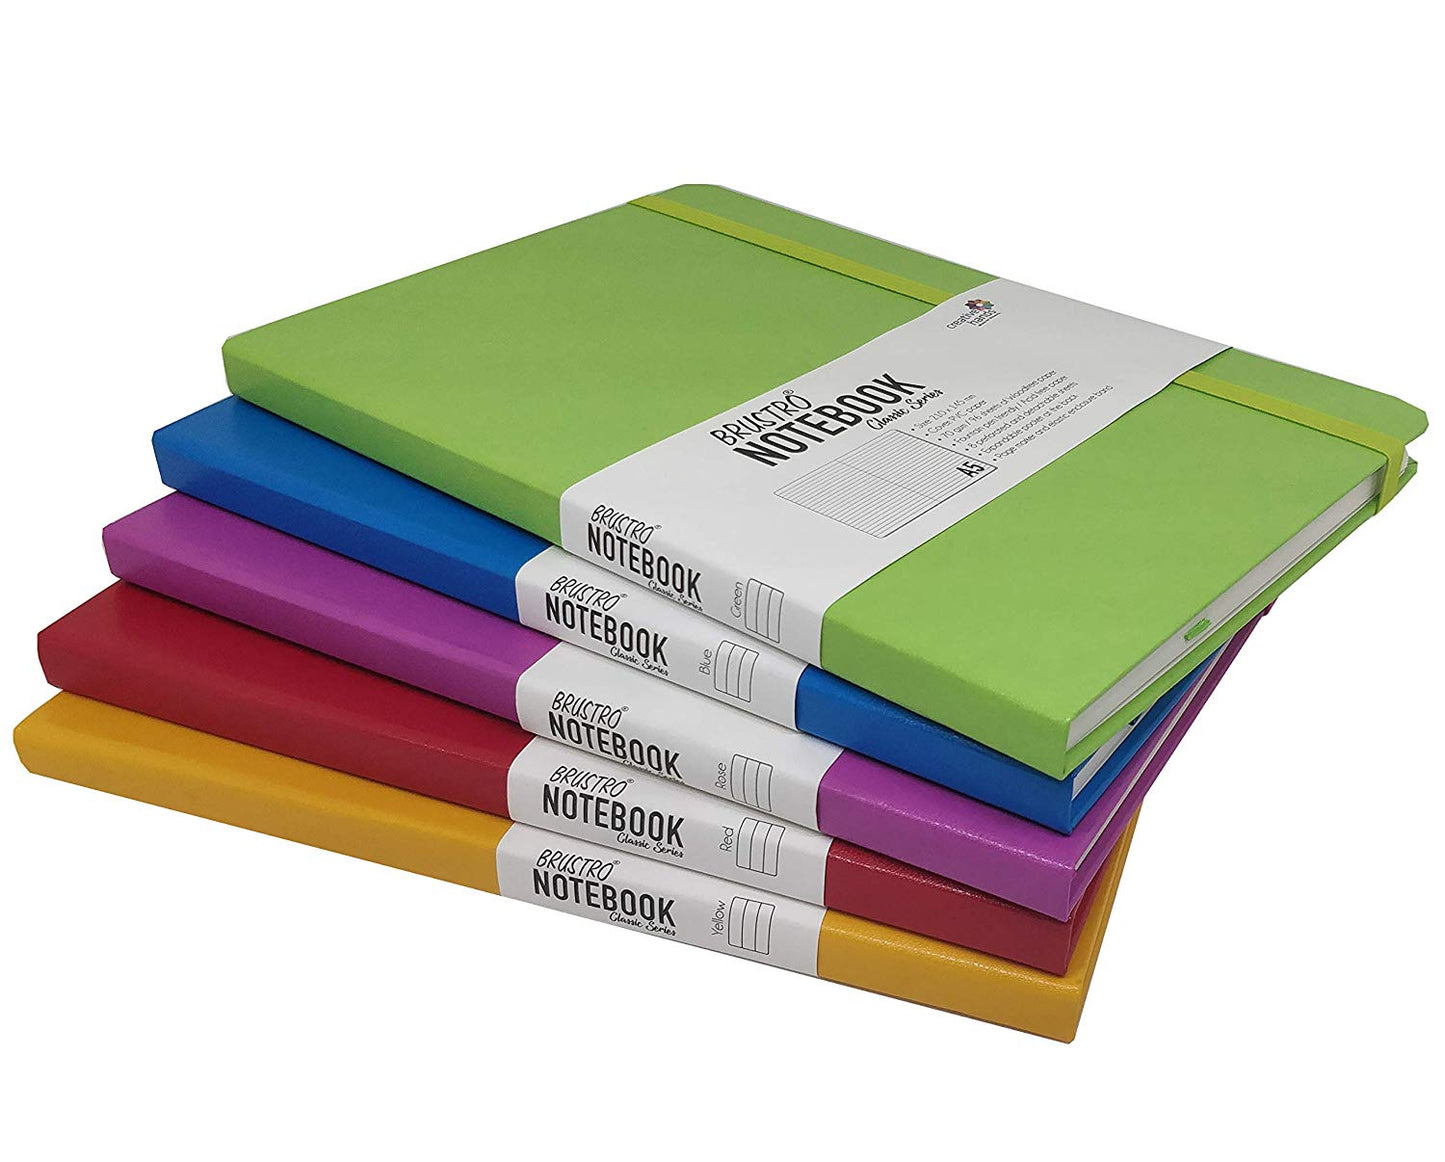 BRUSTRO NOTEBOOK CLASSIC SERIES SET OF 5 A5 (RED, YELLOW, GREEN, ROSE, BLUE)